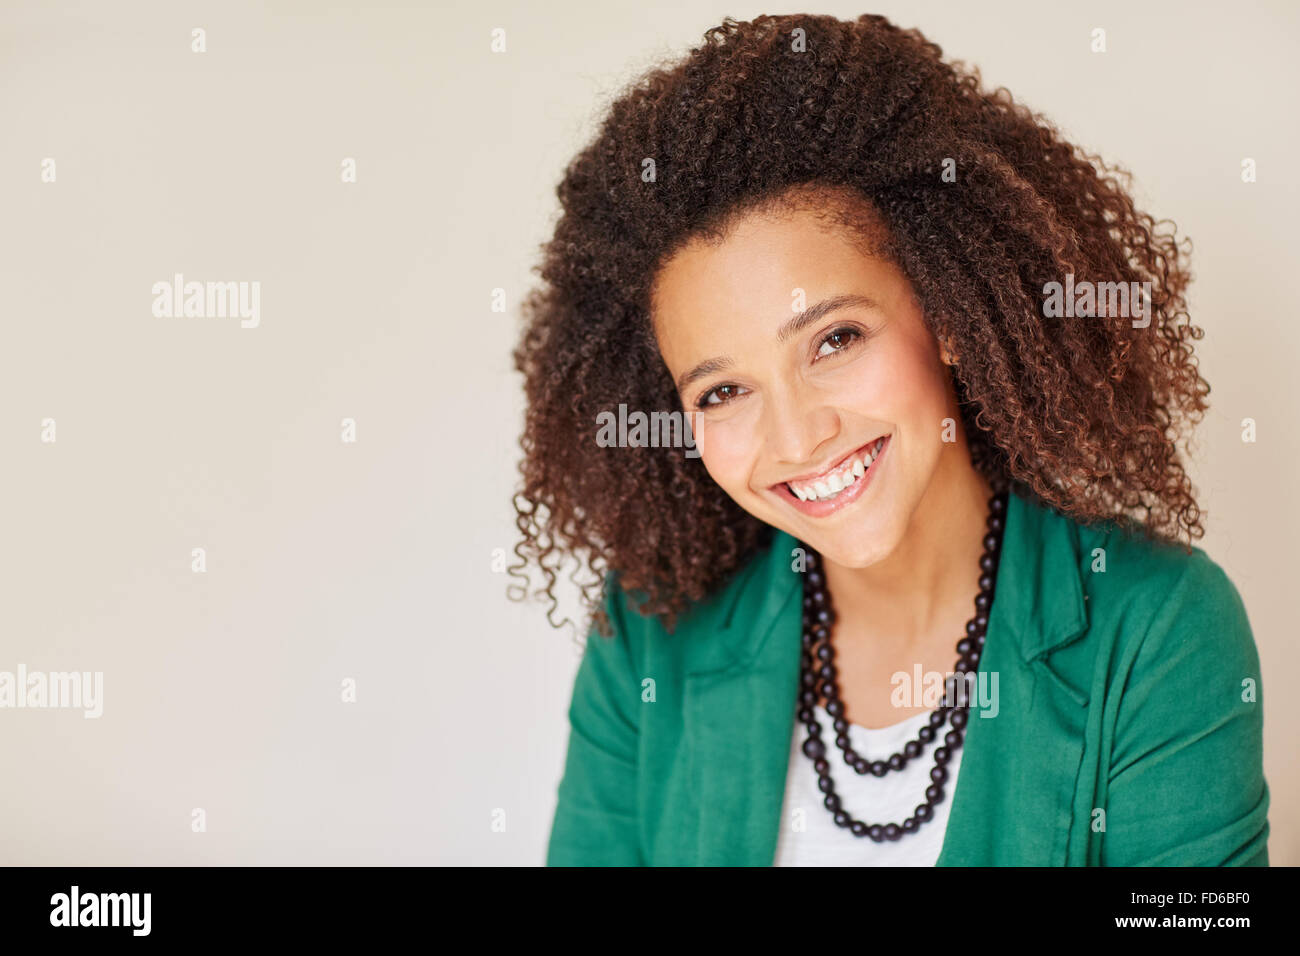 Mixed race businesswoman with a curly afro smiling warmly Stock Photo